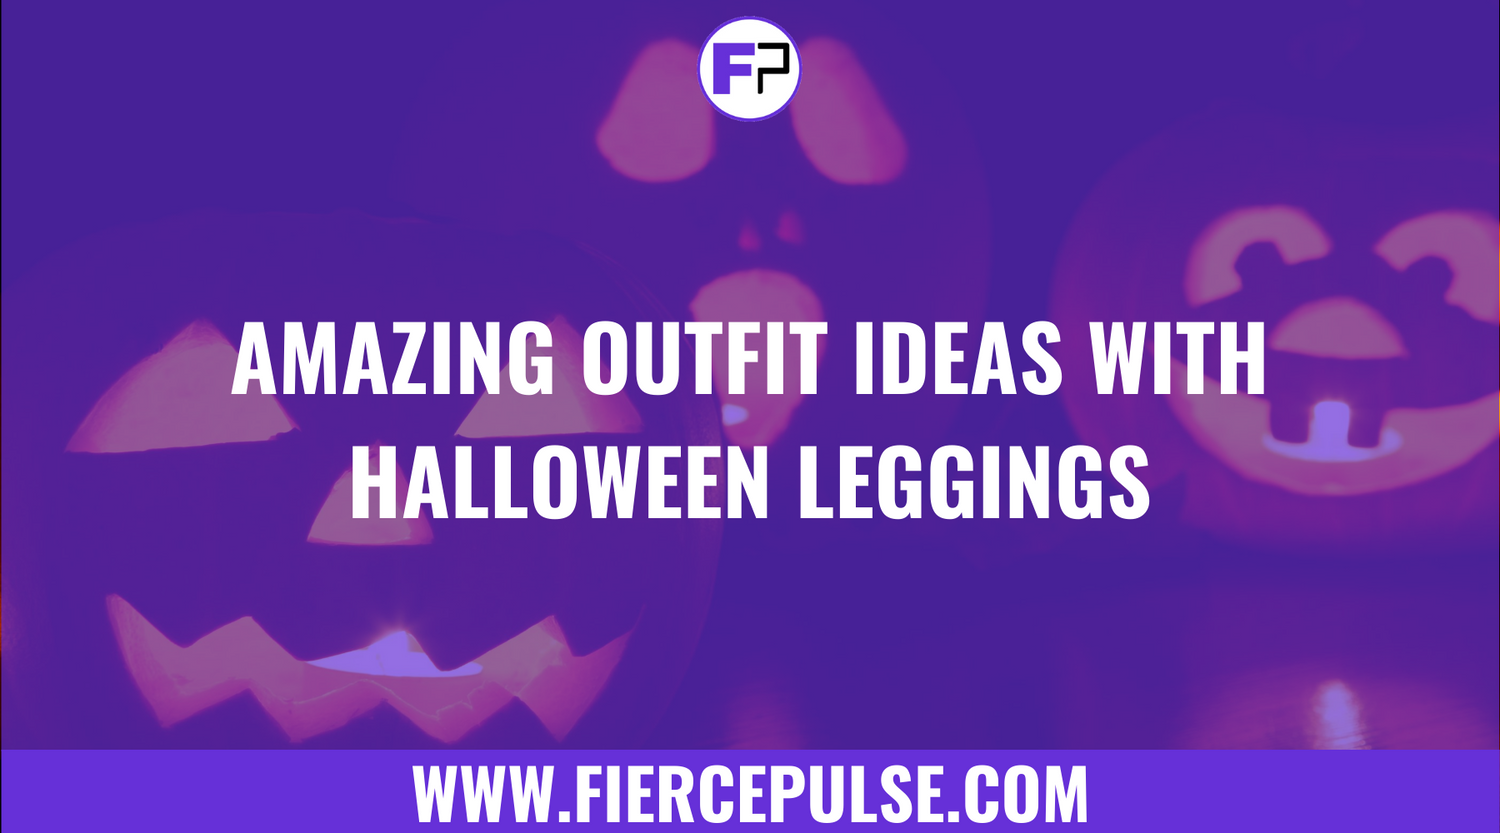 Amazing Outfit Ideas With Halloween Leggings